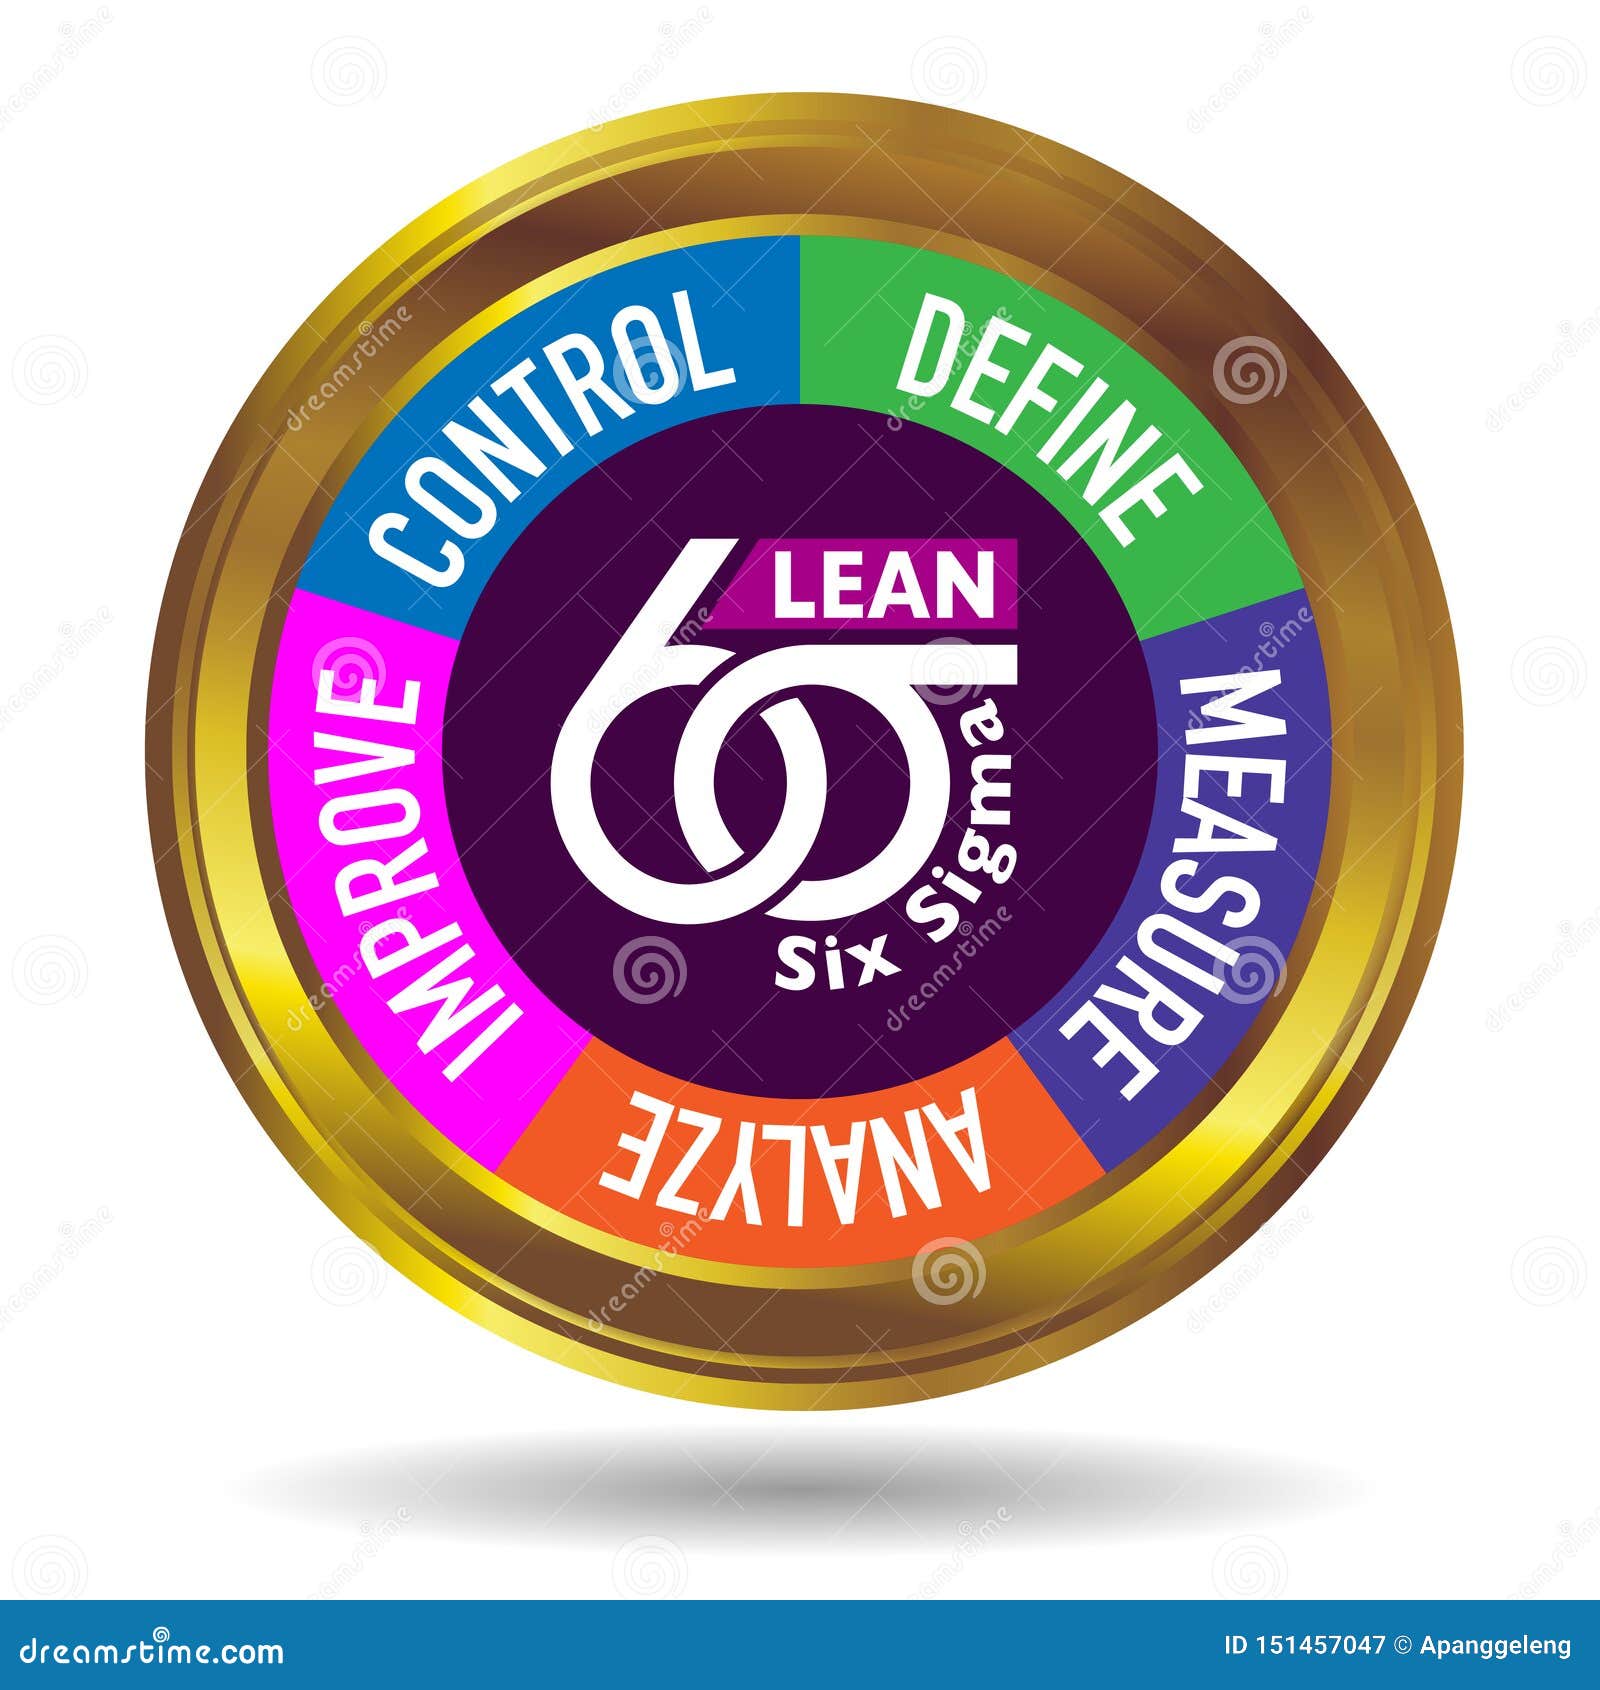 lean six sigma icon gold business tool improvement